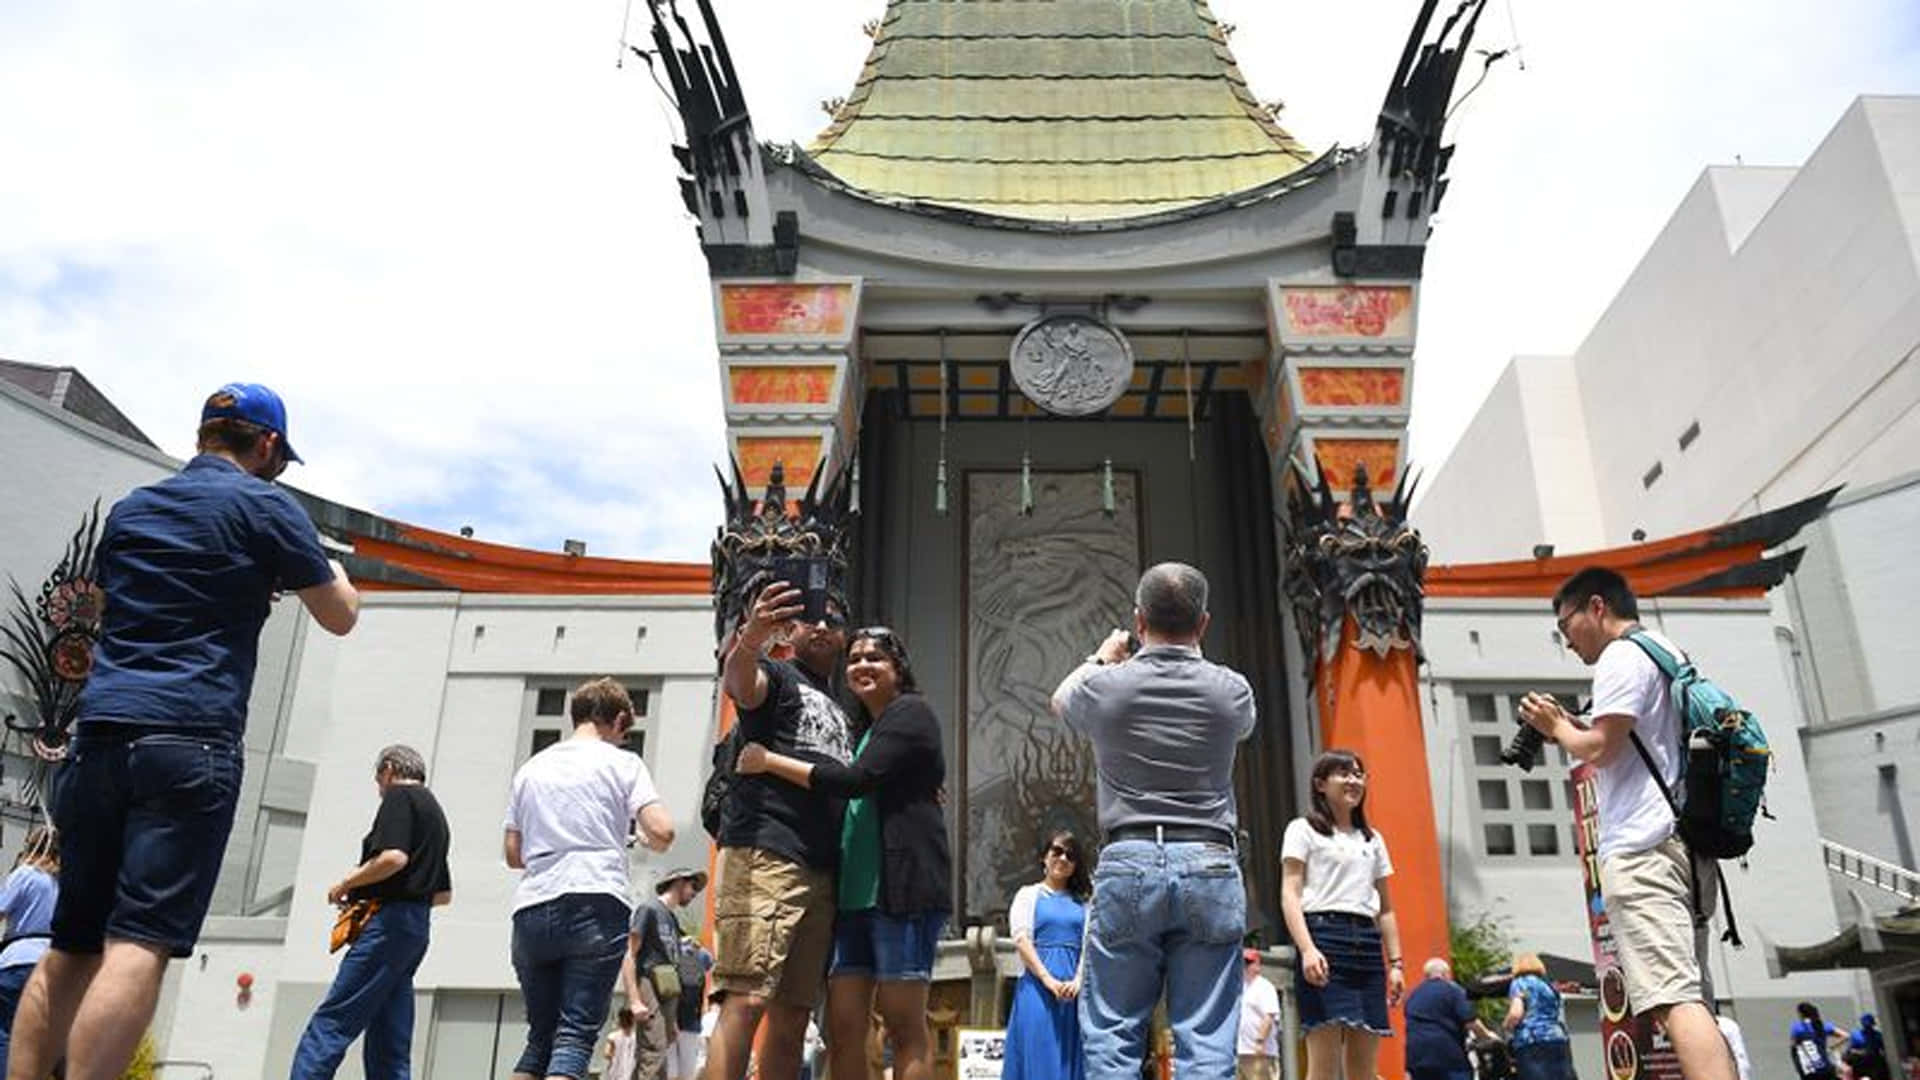 Tourists Outside Graumans Chinese Theatre Wallpaper